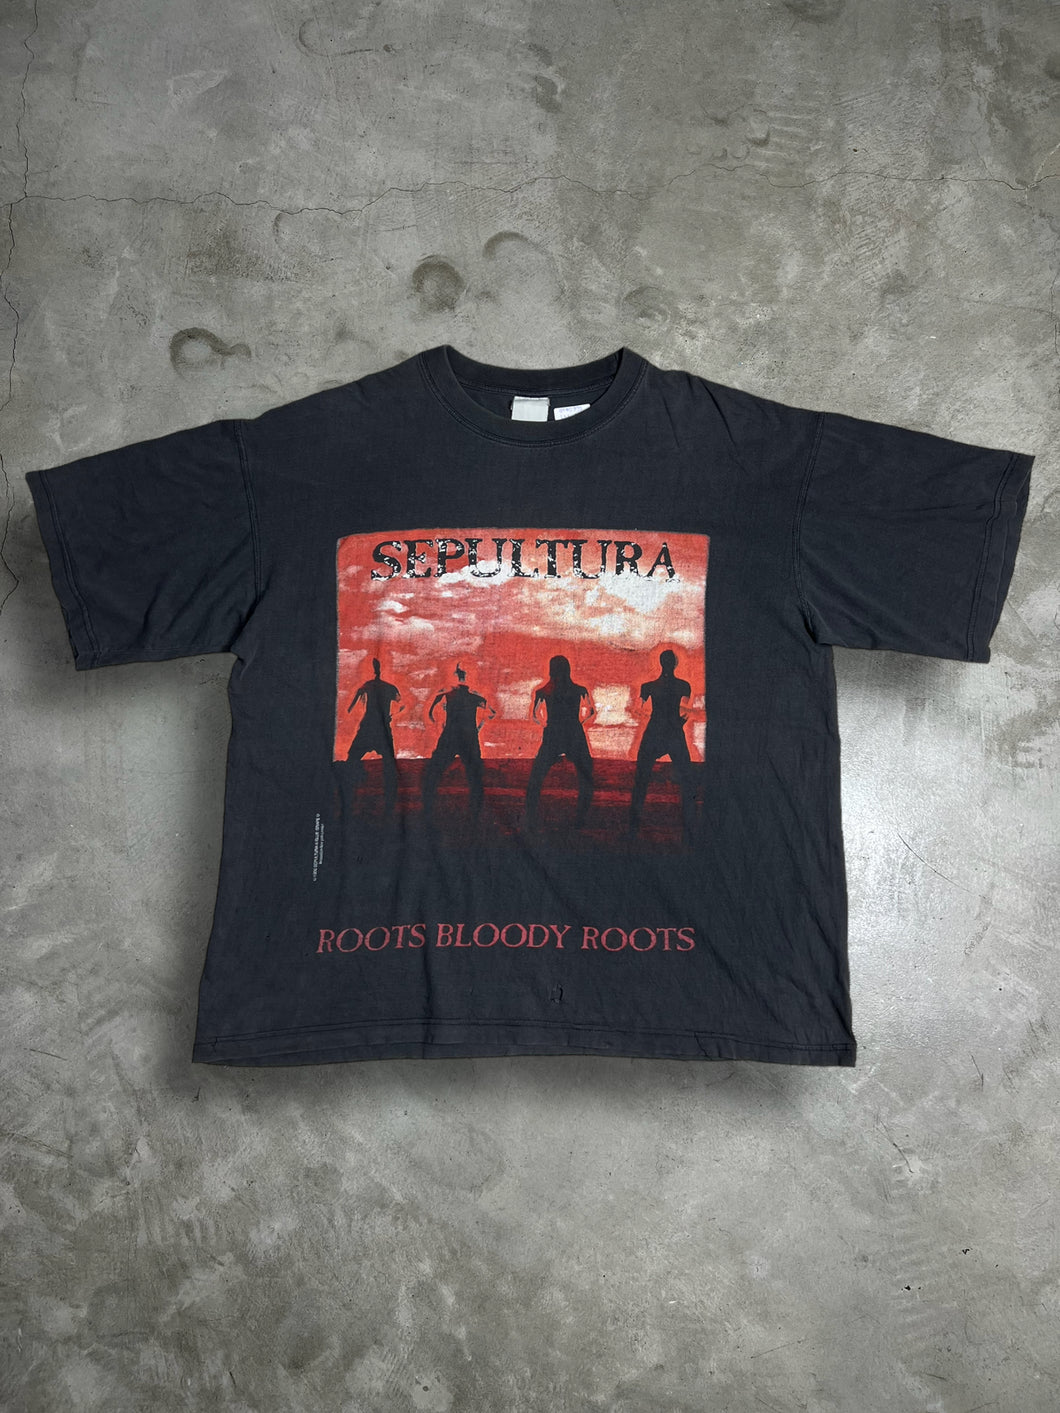 Vintage 90s Sepultura Roots Bloody Roots Album Promo Tee (XXL) GTMD995